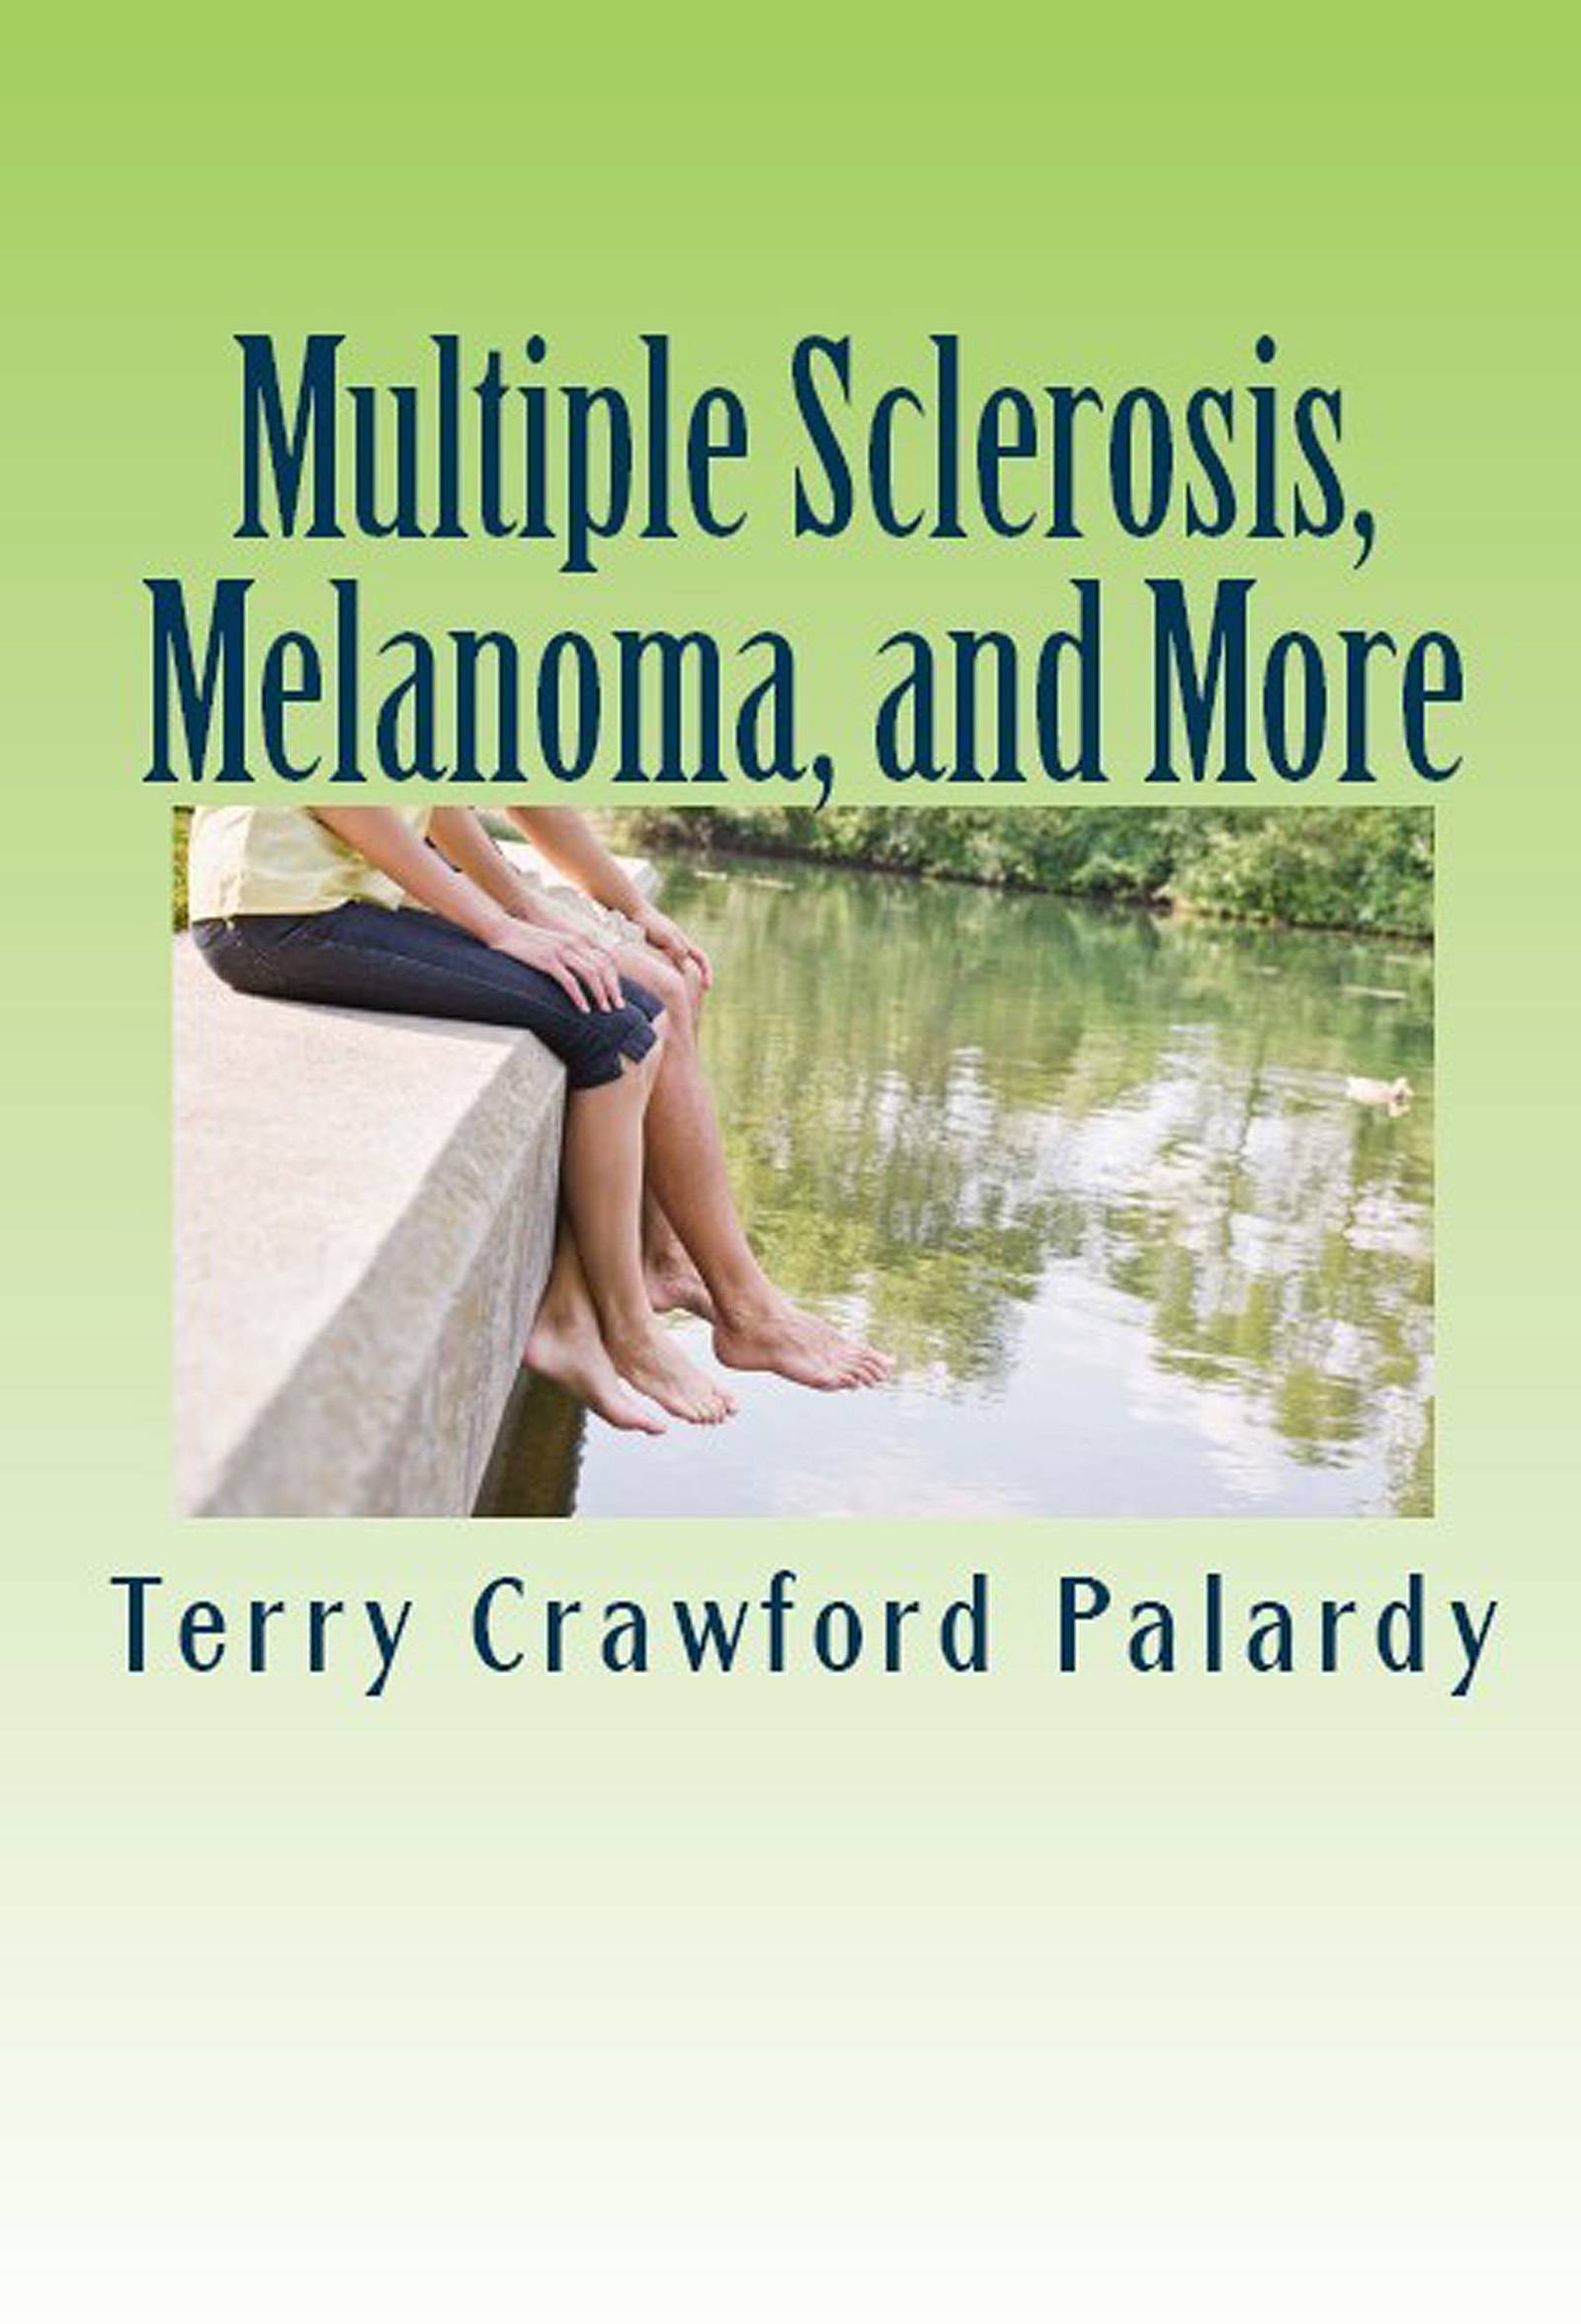 MS, Melanoma and More: the sequel